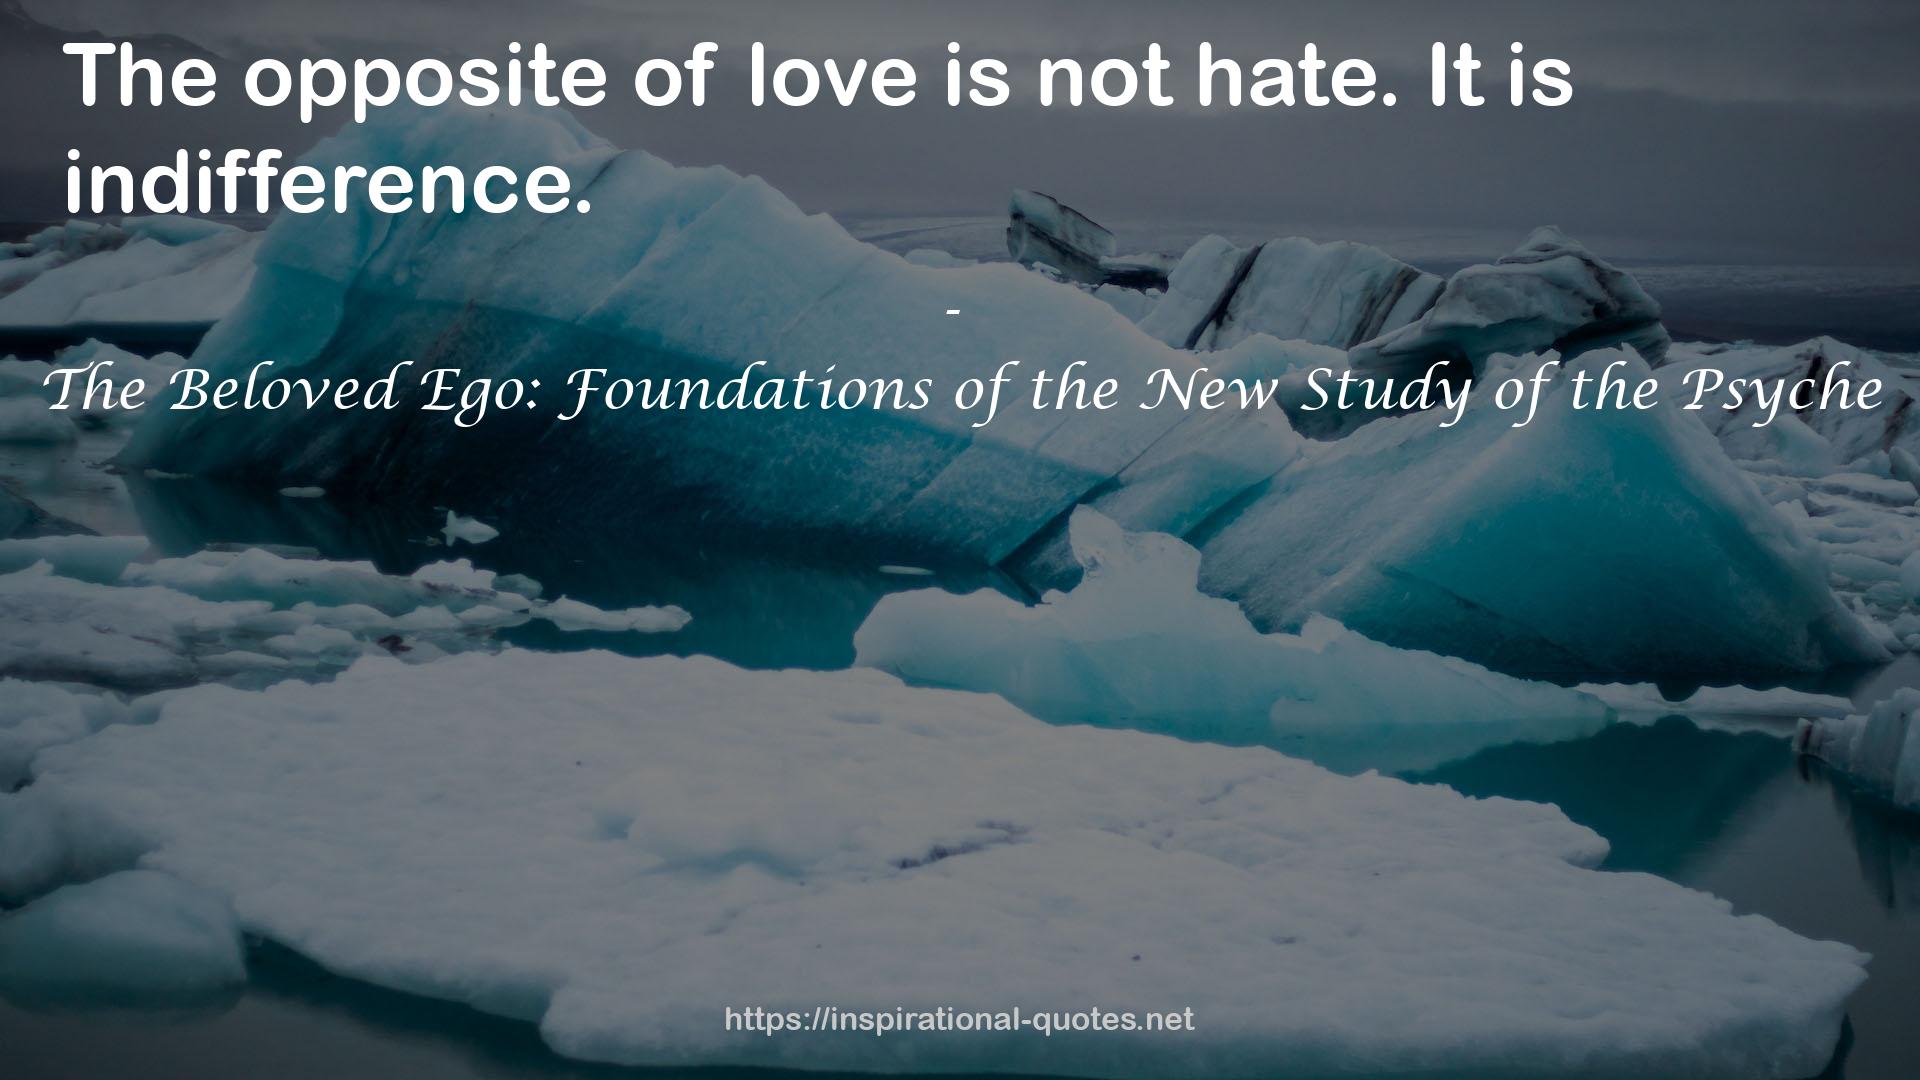 The Beloved Ego: Foundations of the New Study of the Psyche QUOTES